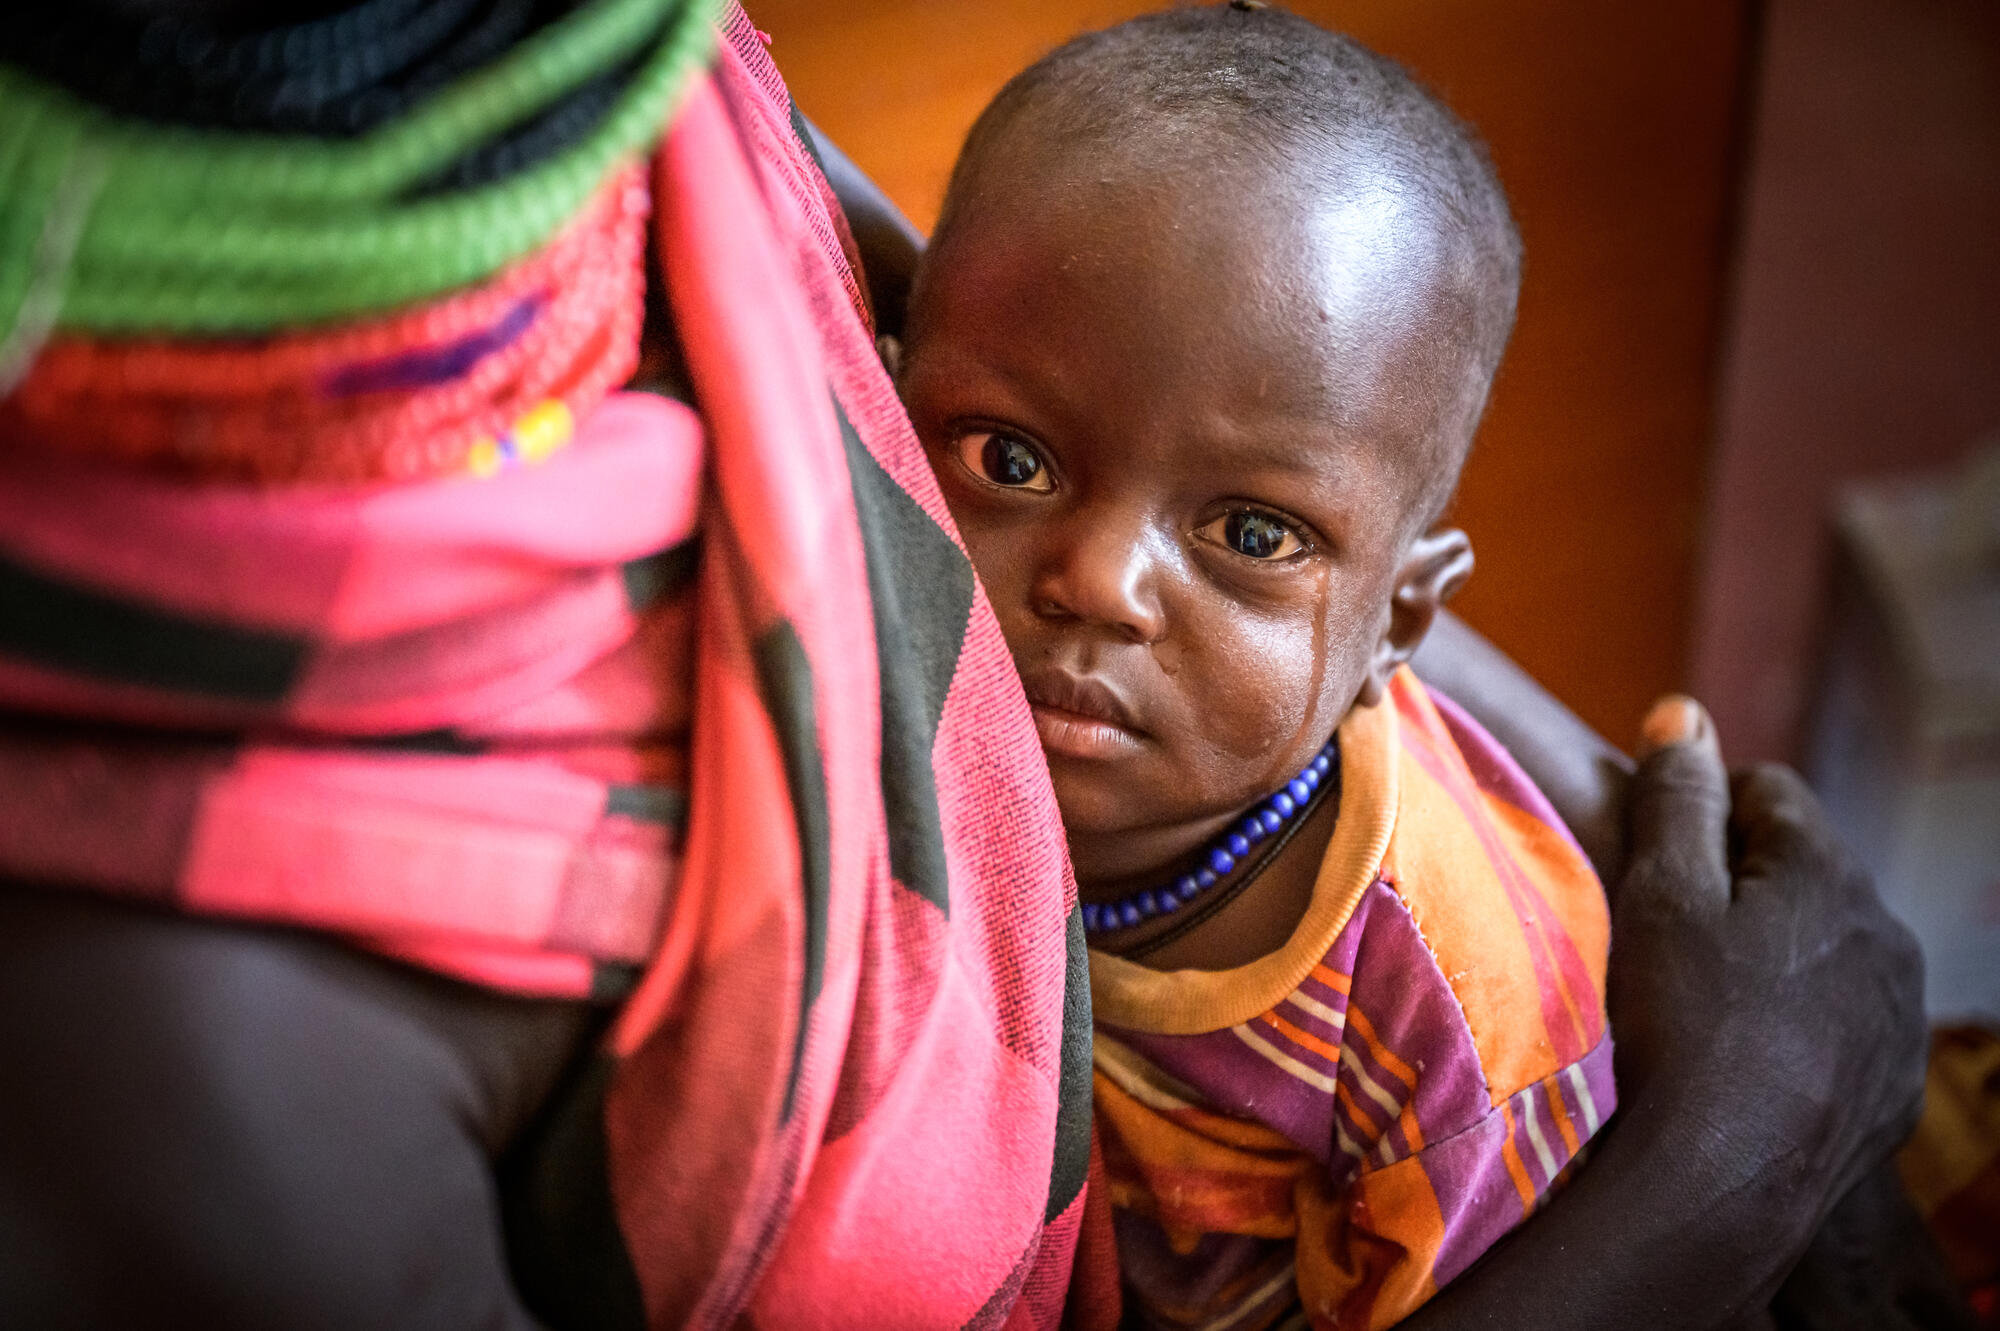 ▲The world is facing a severe food crisis that threatens children